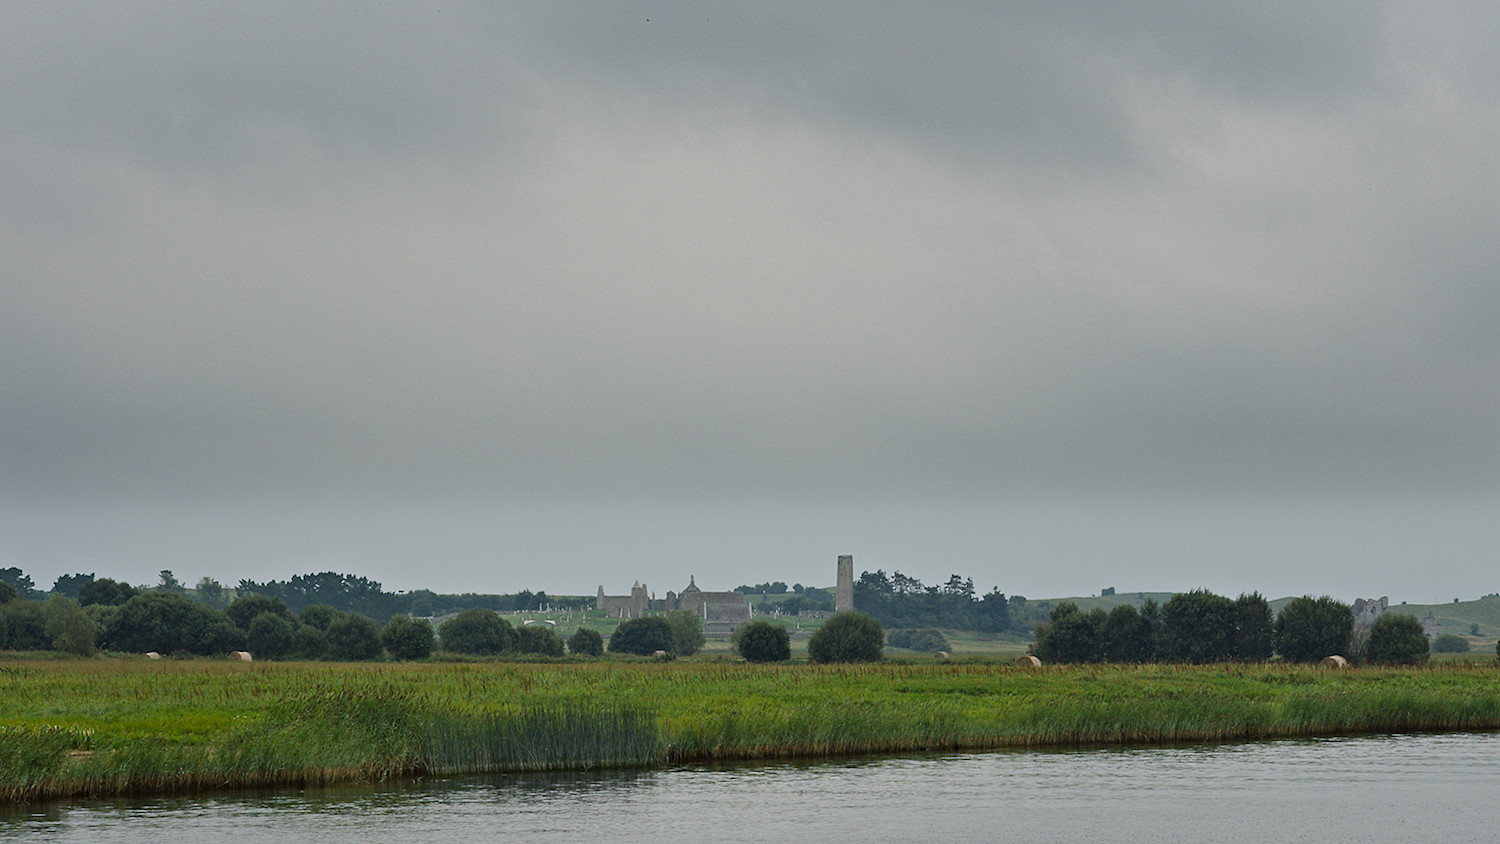 Approaching the ruins of the monastery Clonmacnoise on the river Shannon, County Leinster, Ireland. Tagged with landscape